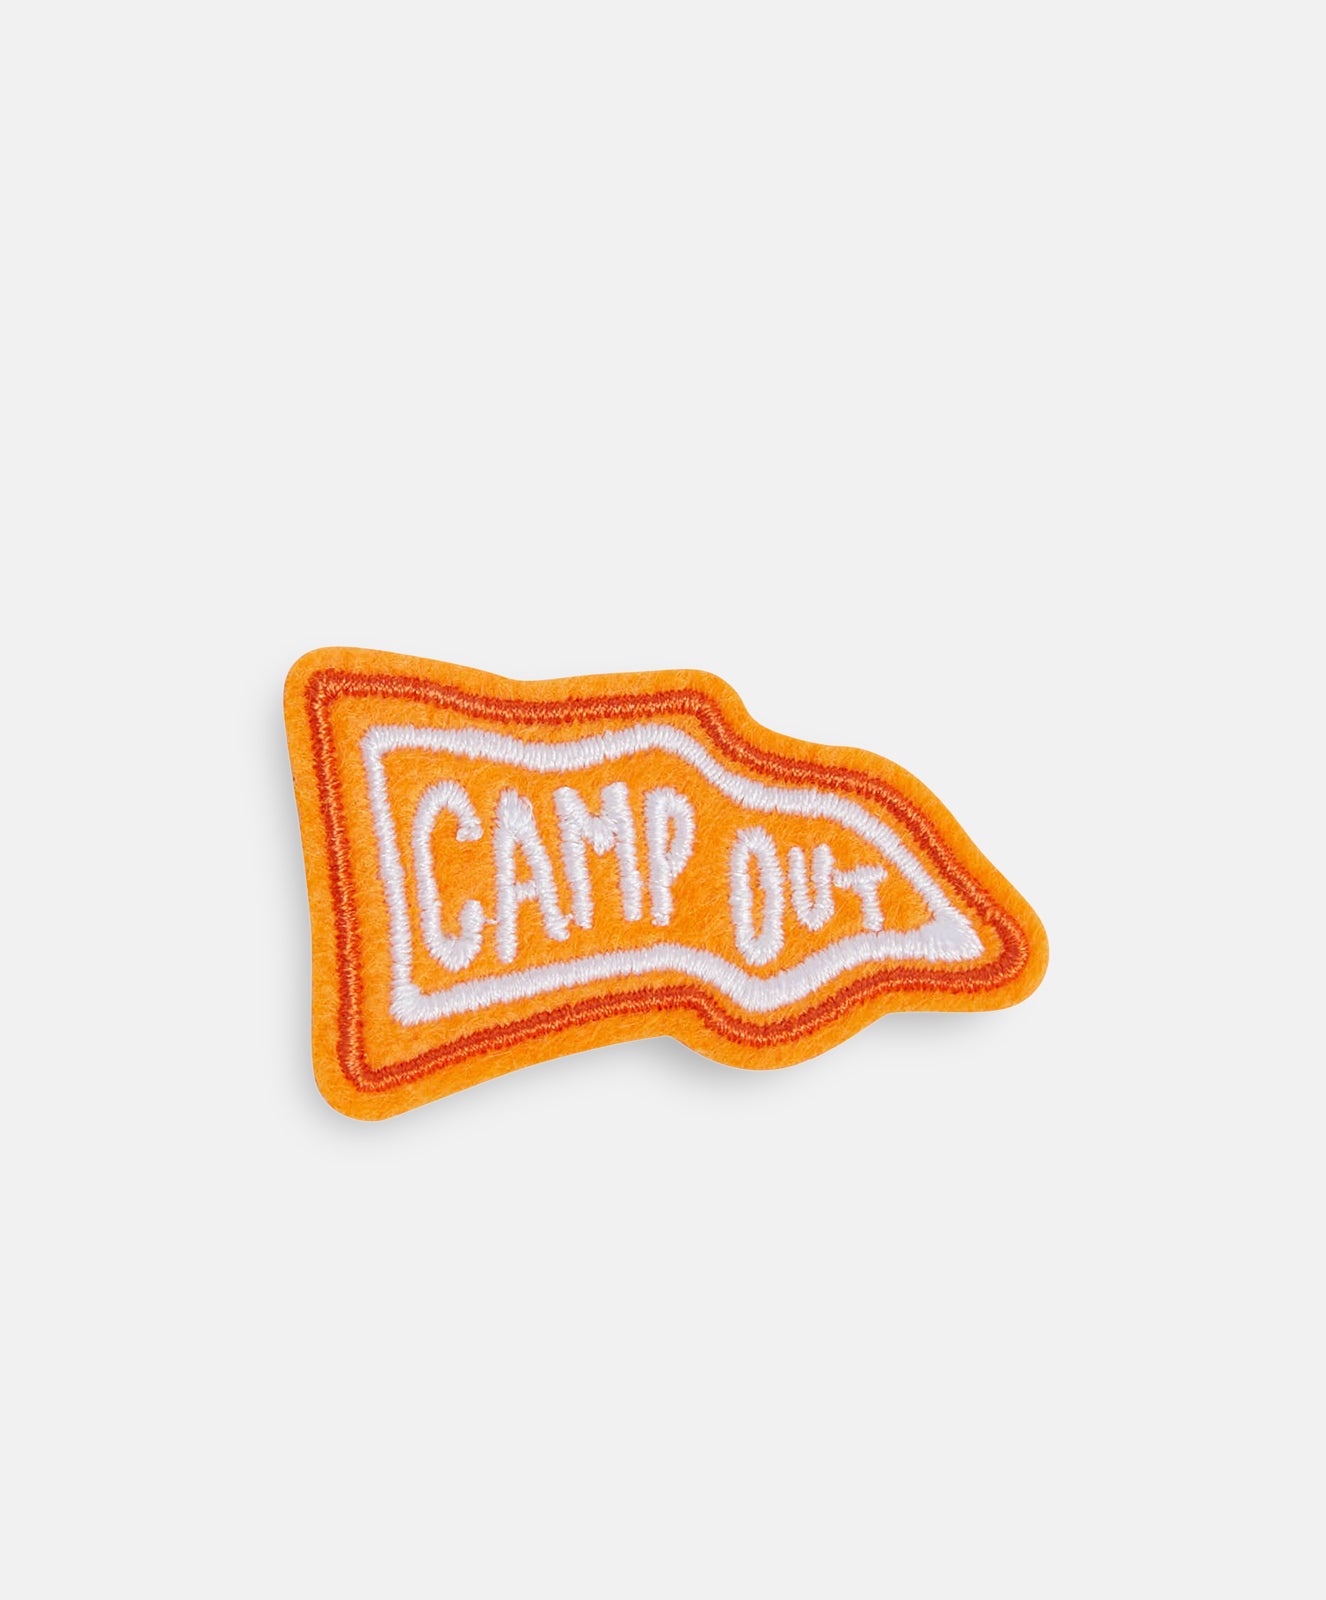 Camp out Patch